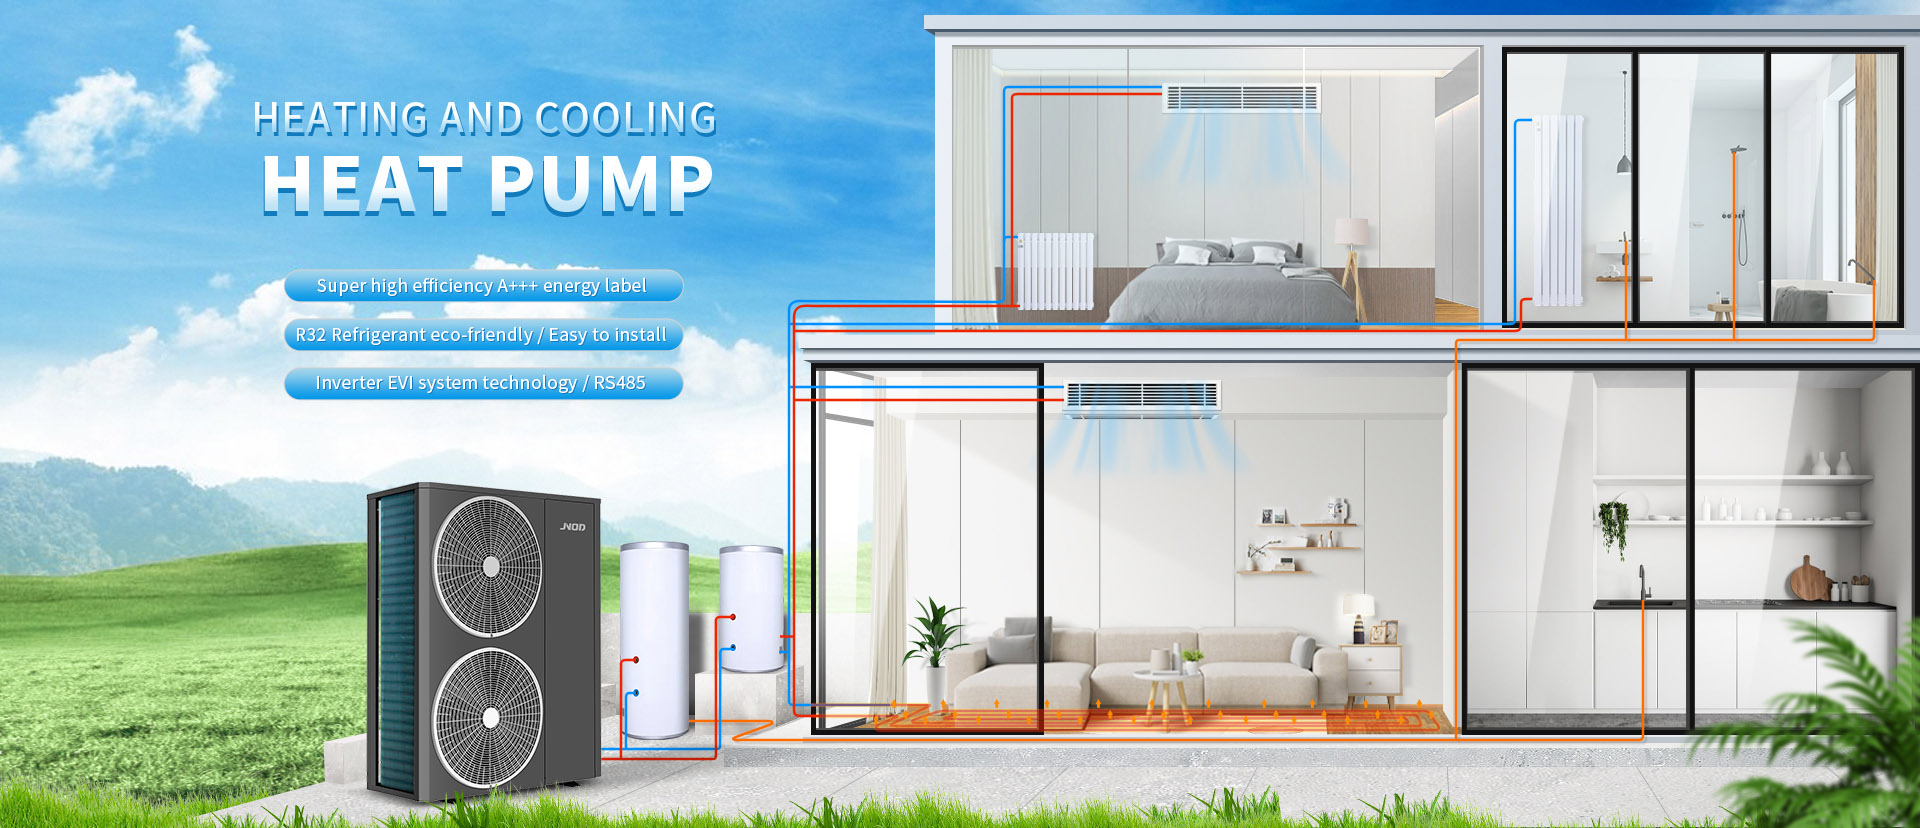 Earth Heating And Cooling Heat Pump